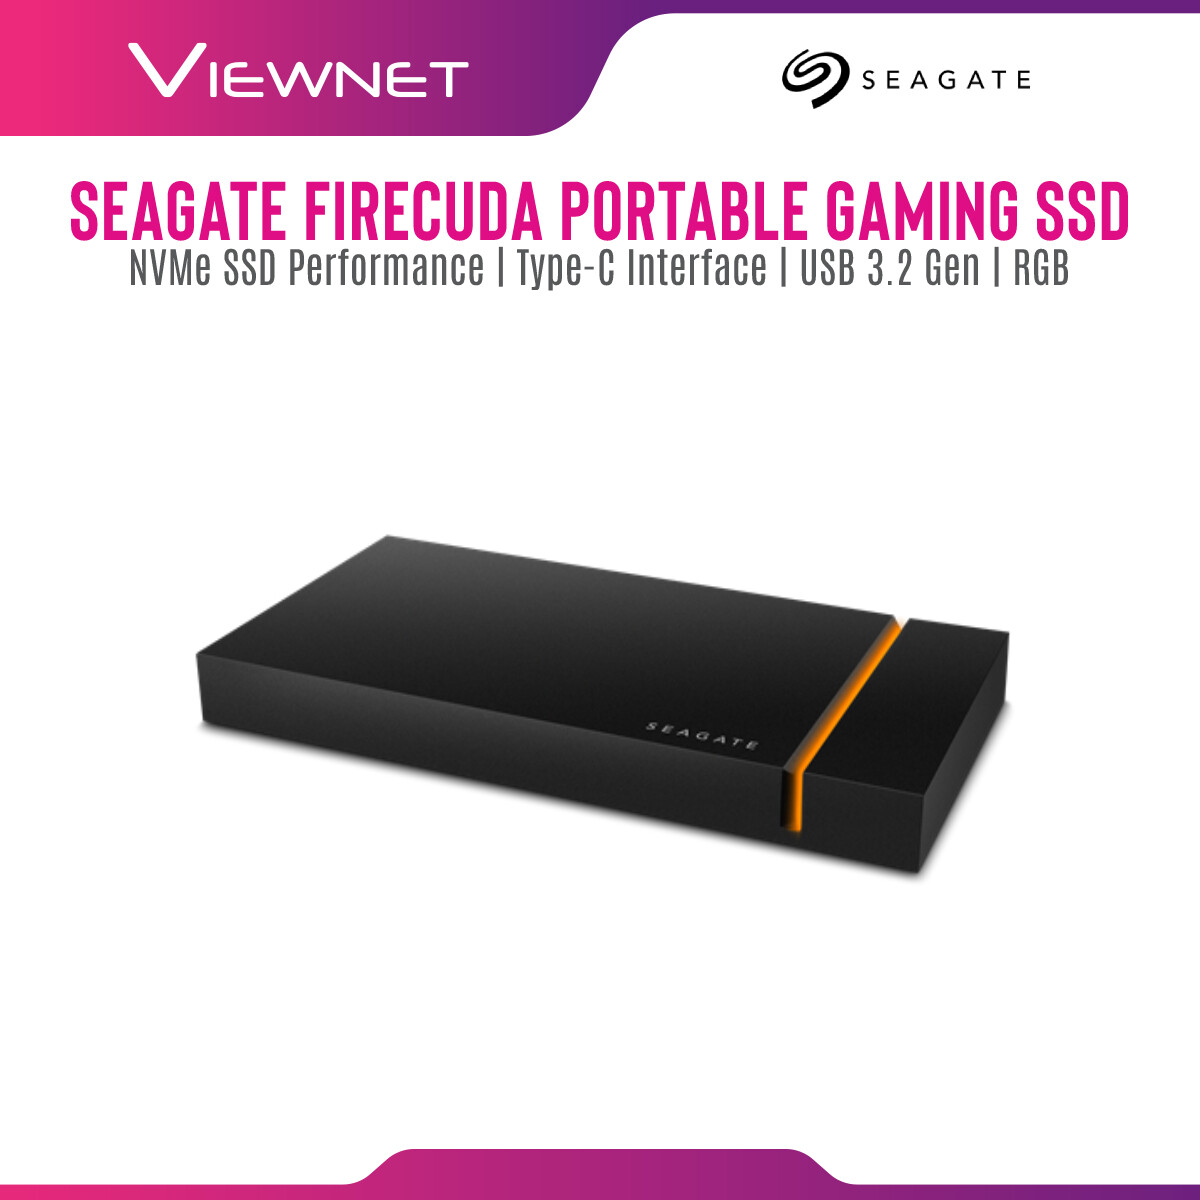 Seagate FireCuda Gaming SSD (1TB / 2TB) with USB-C Connection, Up To 2000MB/s Transfer Speed, Customisable RGB LED Lighting , USB 3.2Gen 2x2, NVMe SSD Performance